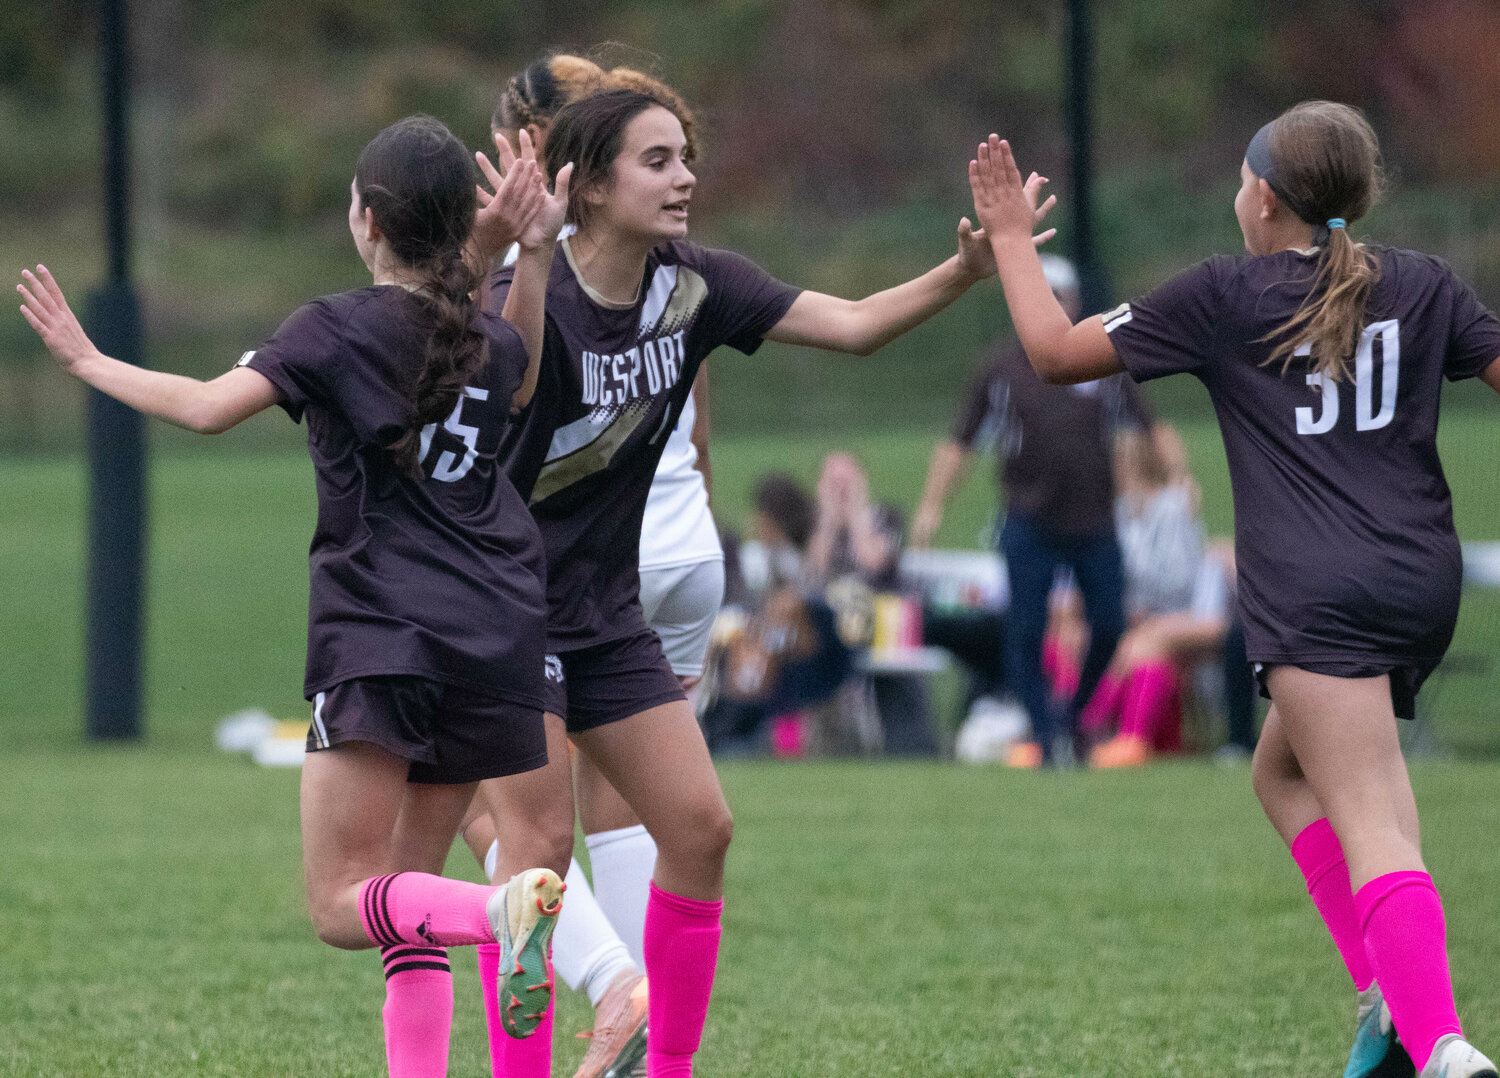 Julia George (left) celebrates a goal scored by seventh grader Sophia Nickelson (left) and assisted by seventh grader Harper Thibodeau (right) during the Wildcats’ win over Southeastern.